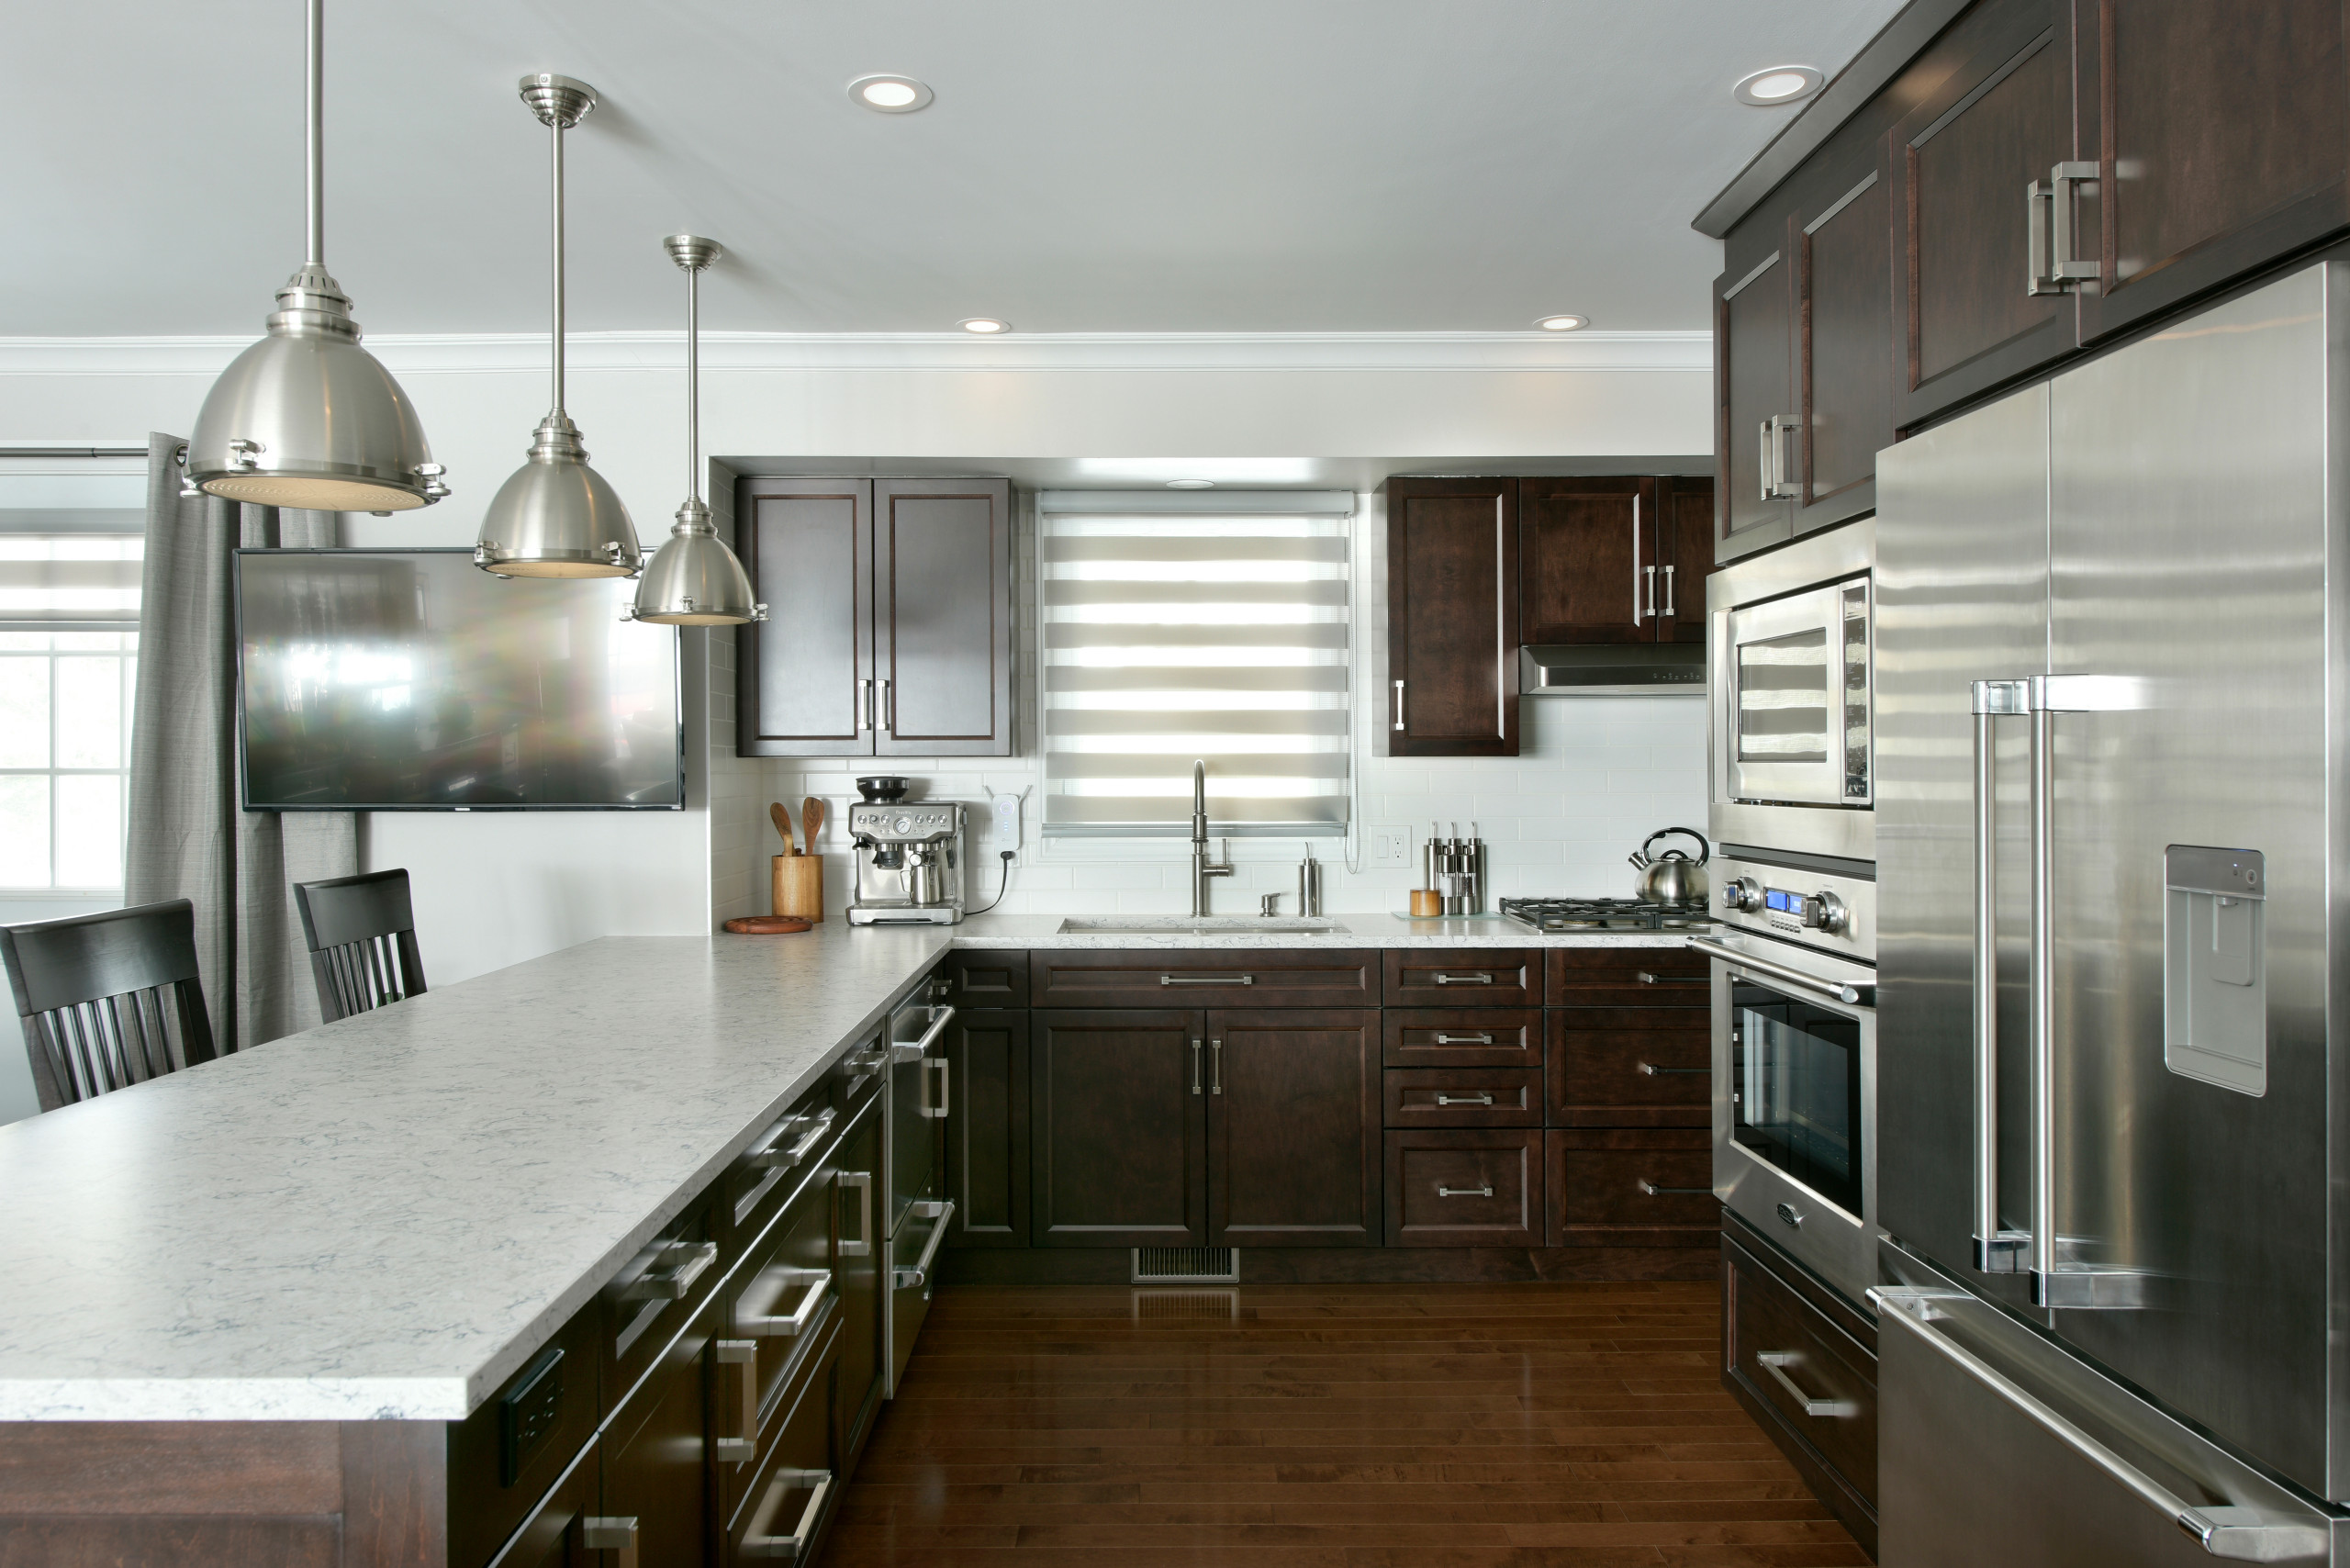 A freshly renovated kitchen by Deslaurier